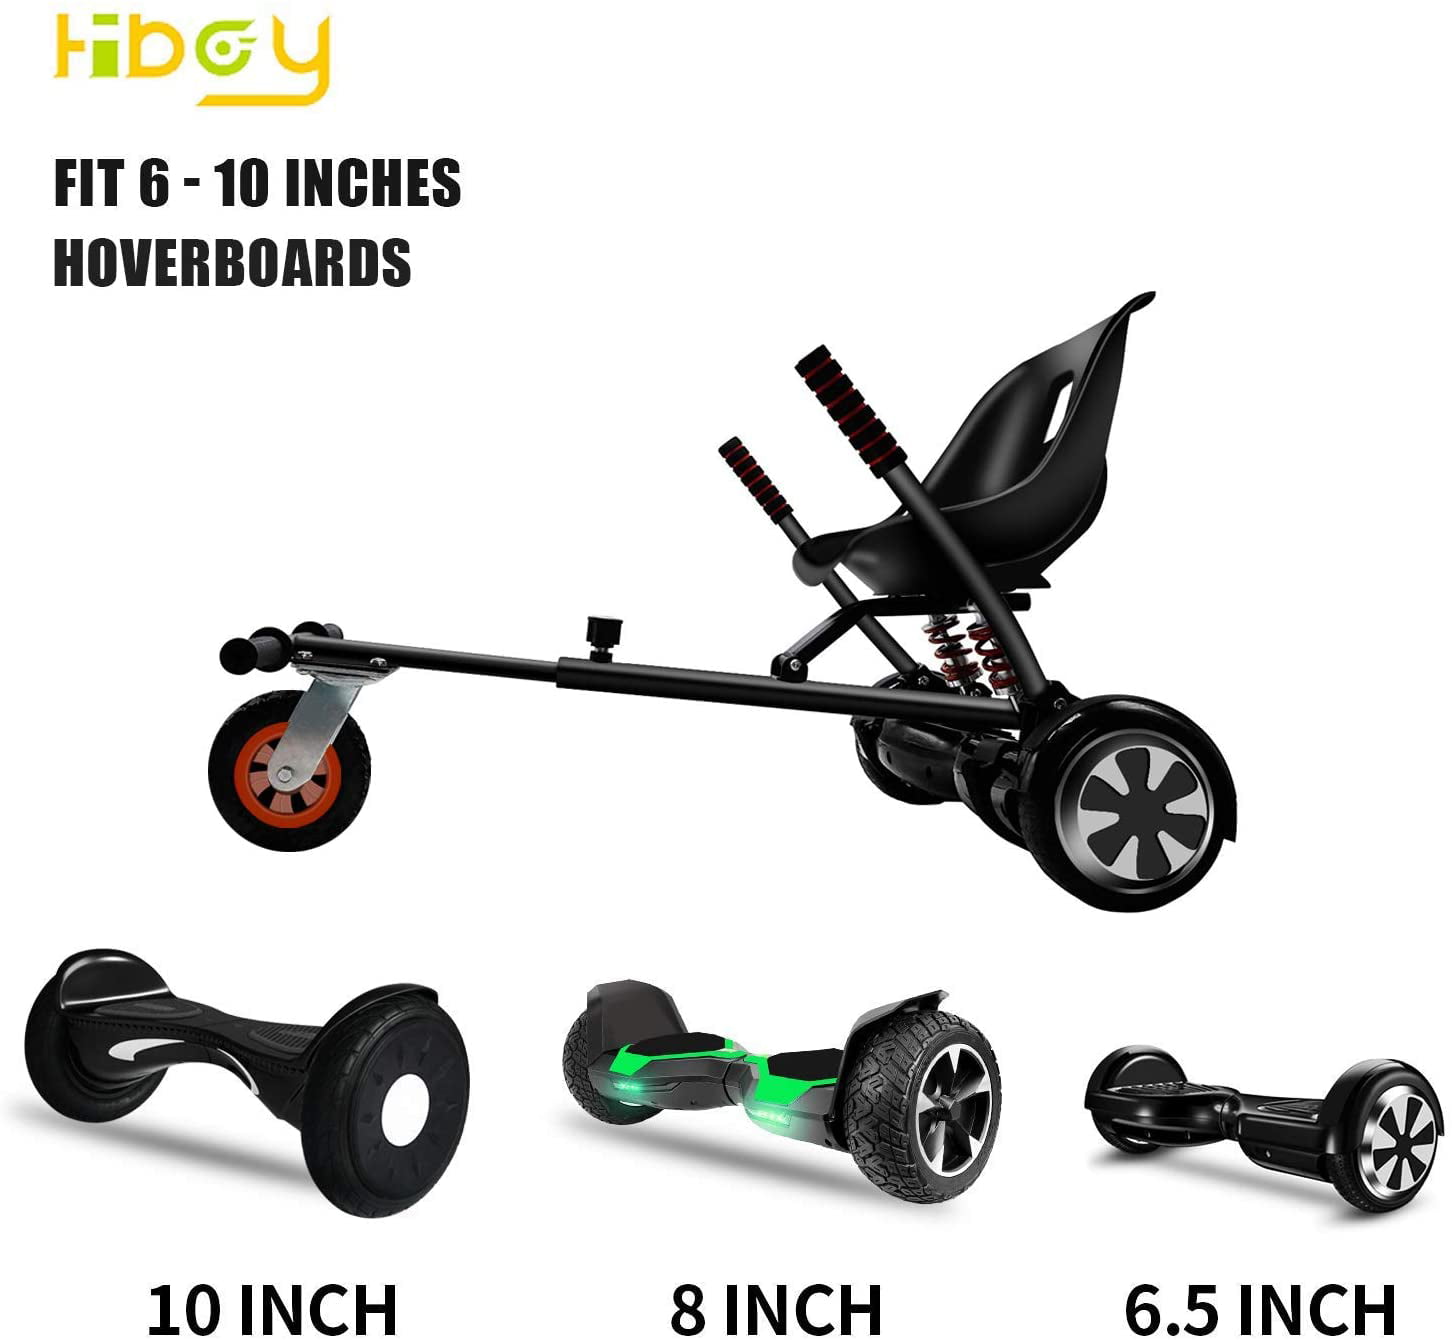 Hiboy HC-02 Hoverboard Seat Attachment with Rear Suspension Go Kart Accessory for 6.5 8 10 Two Wheel Self Balancing Scooter 